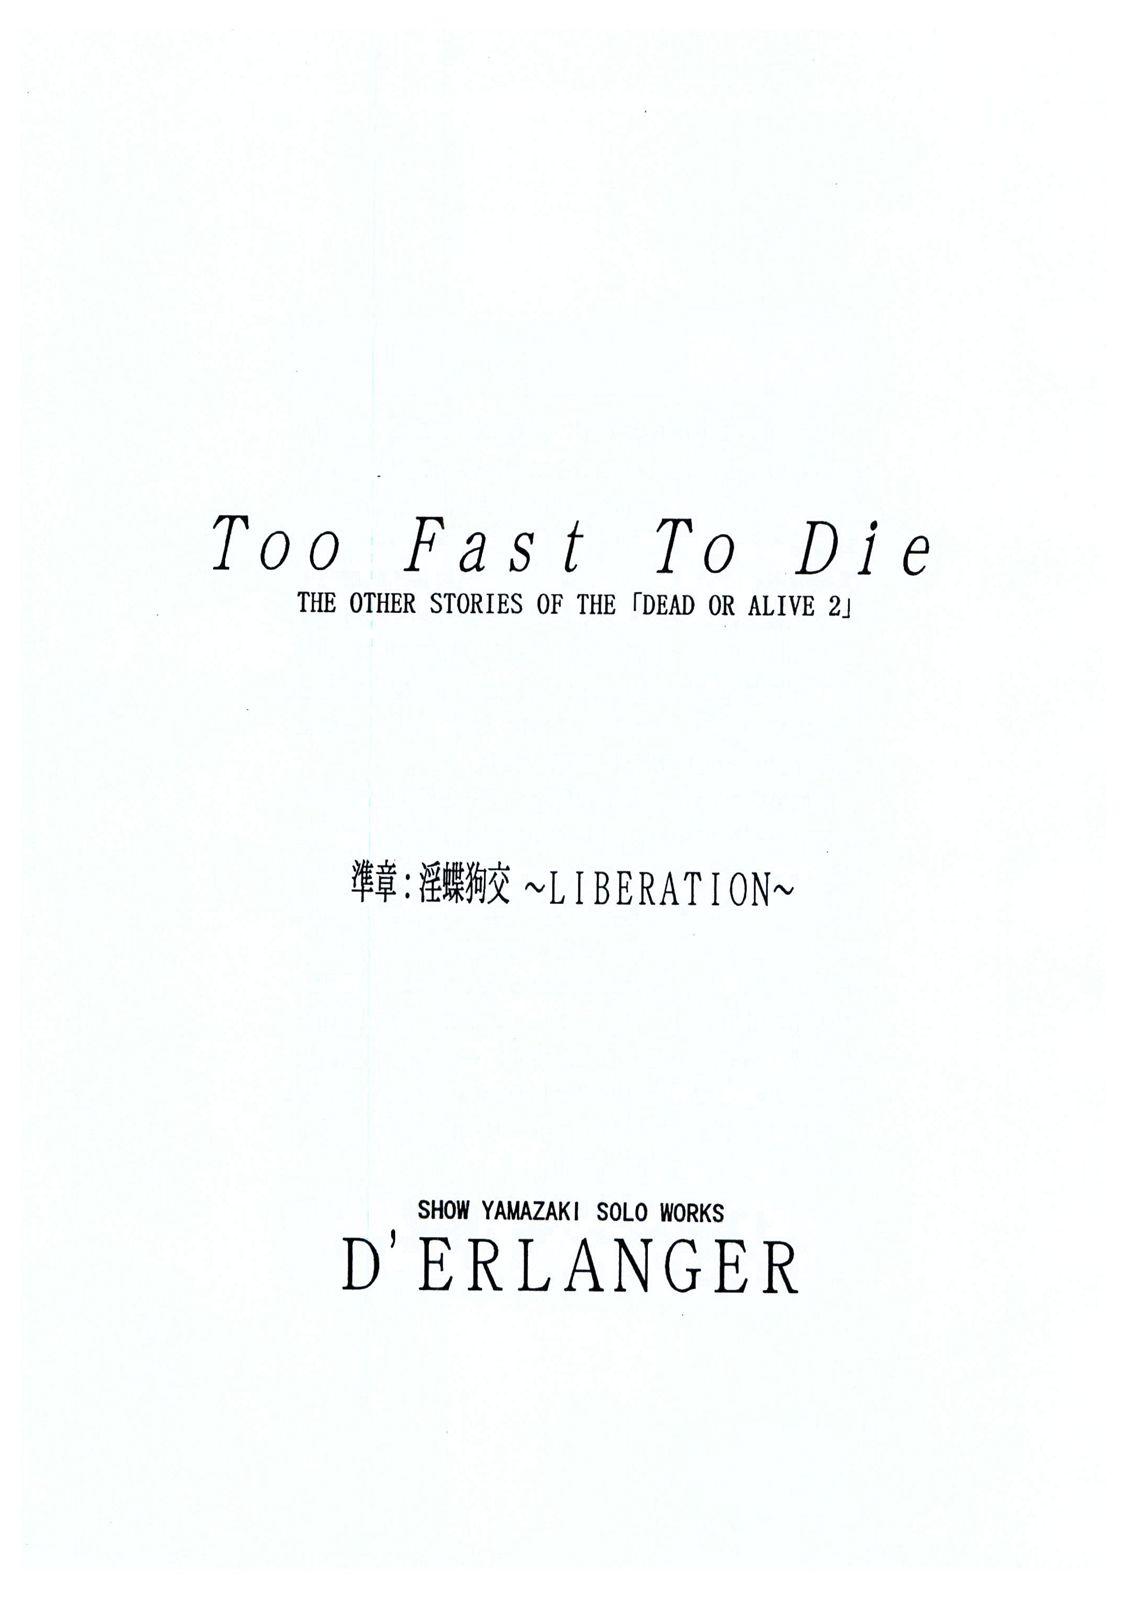 Fuck Too Fast To Die - Dead or alive Gaping - Picture 3